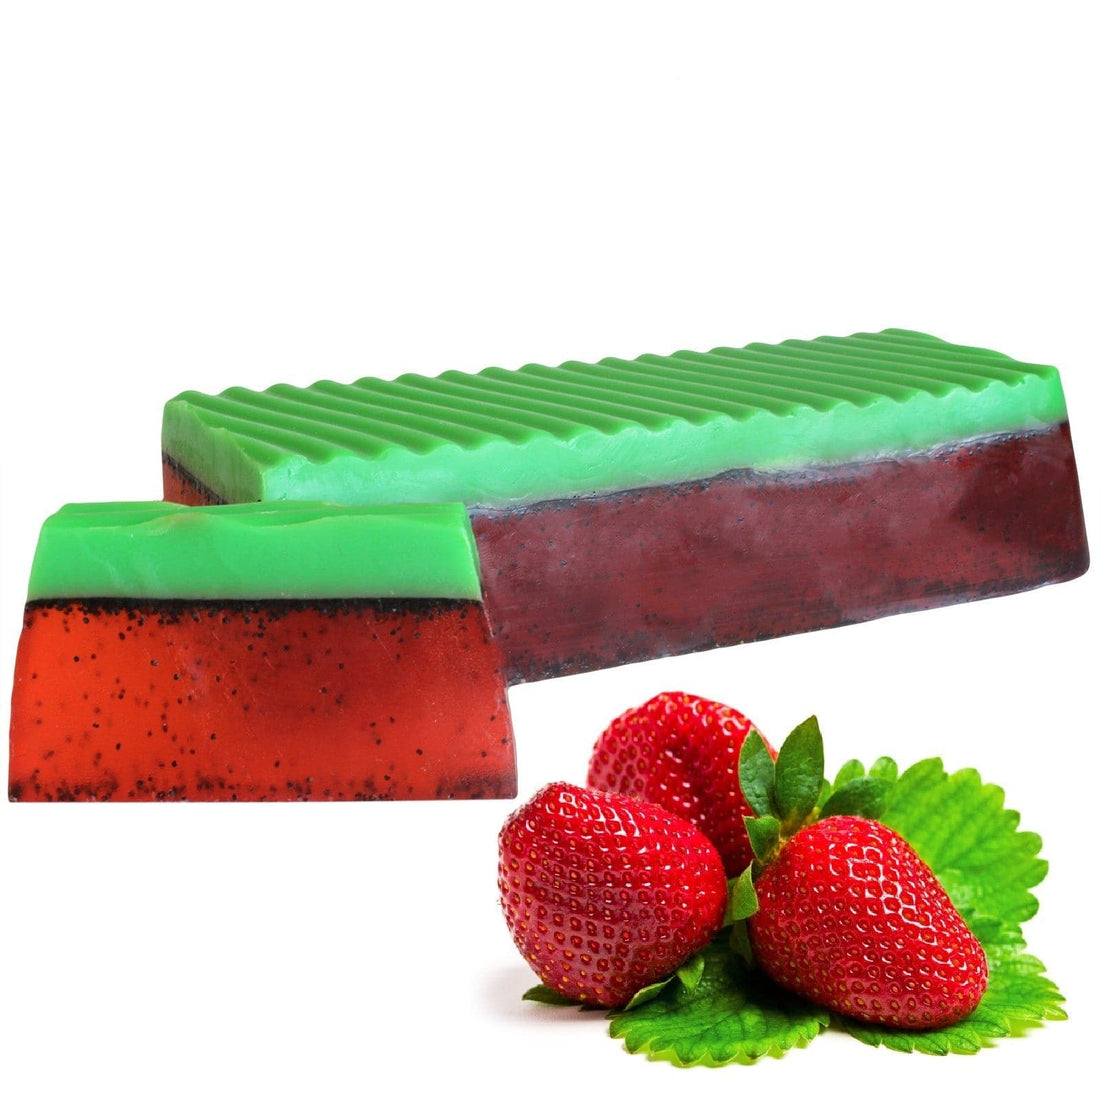 Tropical Paradise Soap Loaf - Strawberry - best price from Maltashopper.com TPSOAP-07